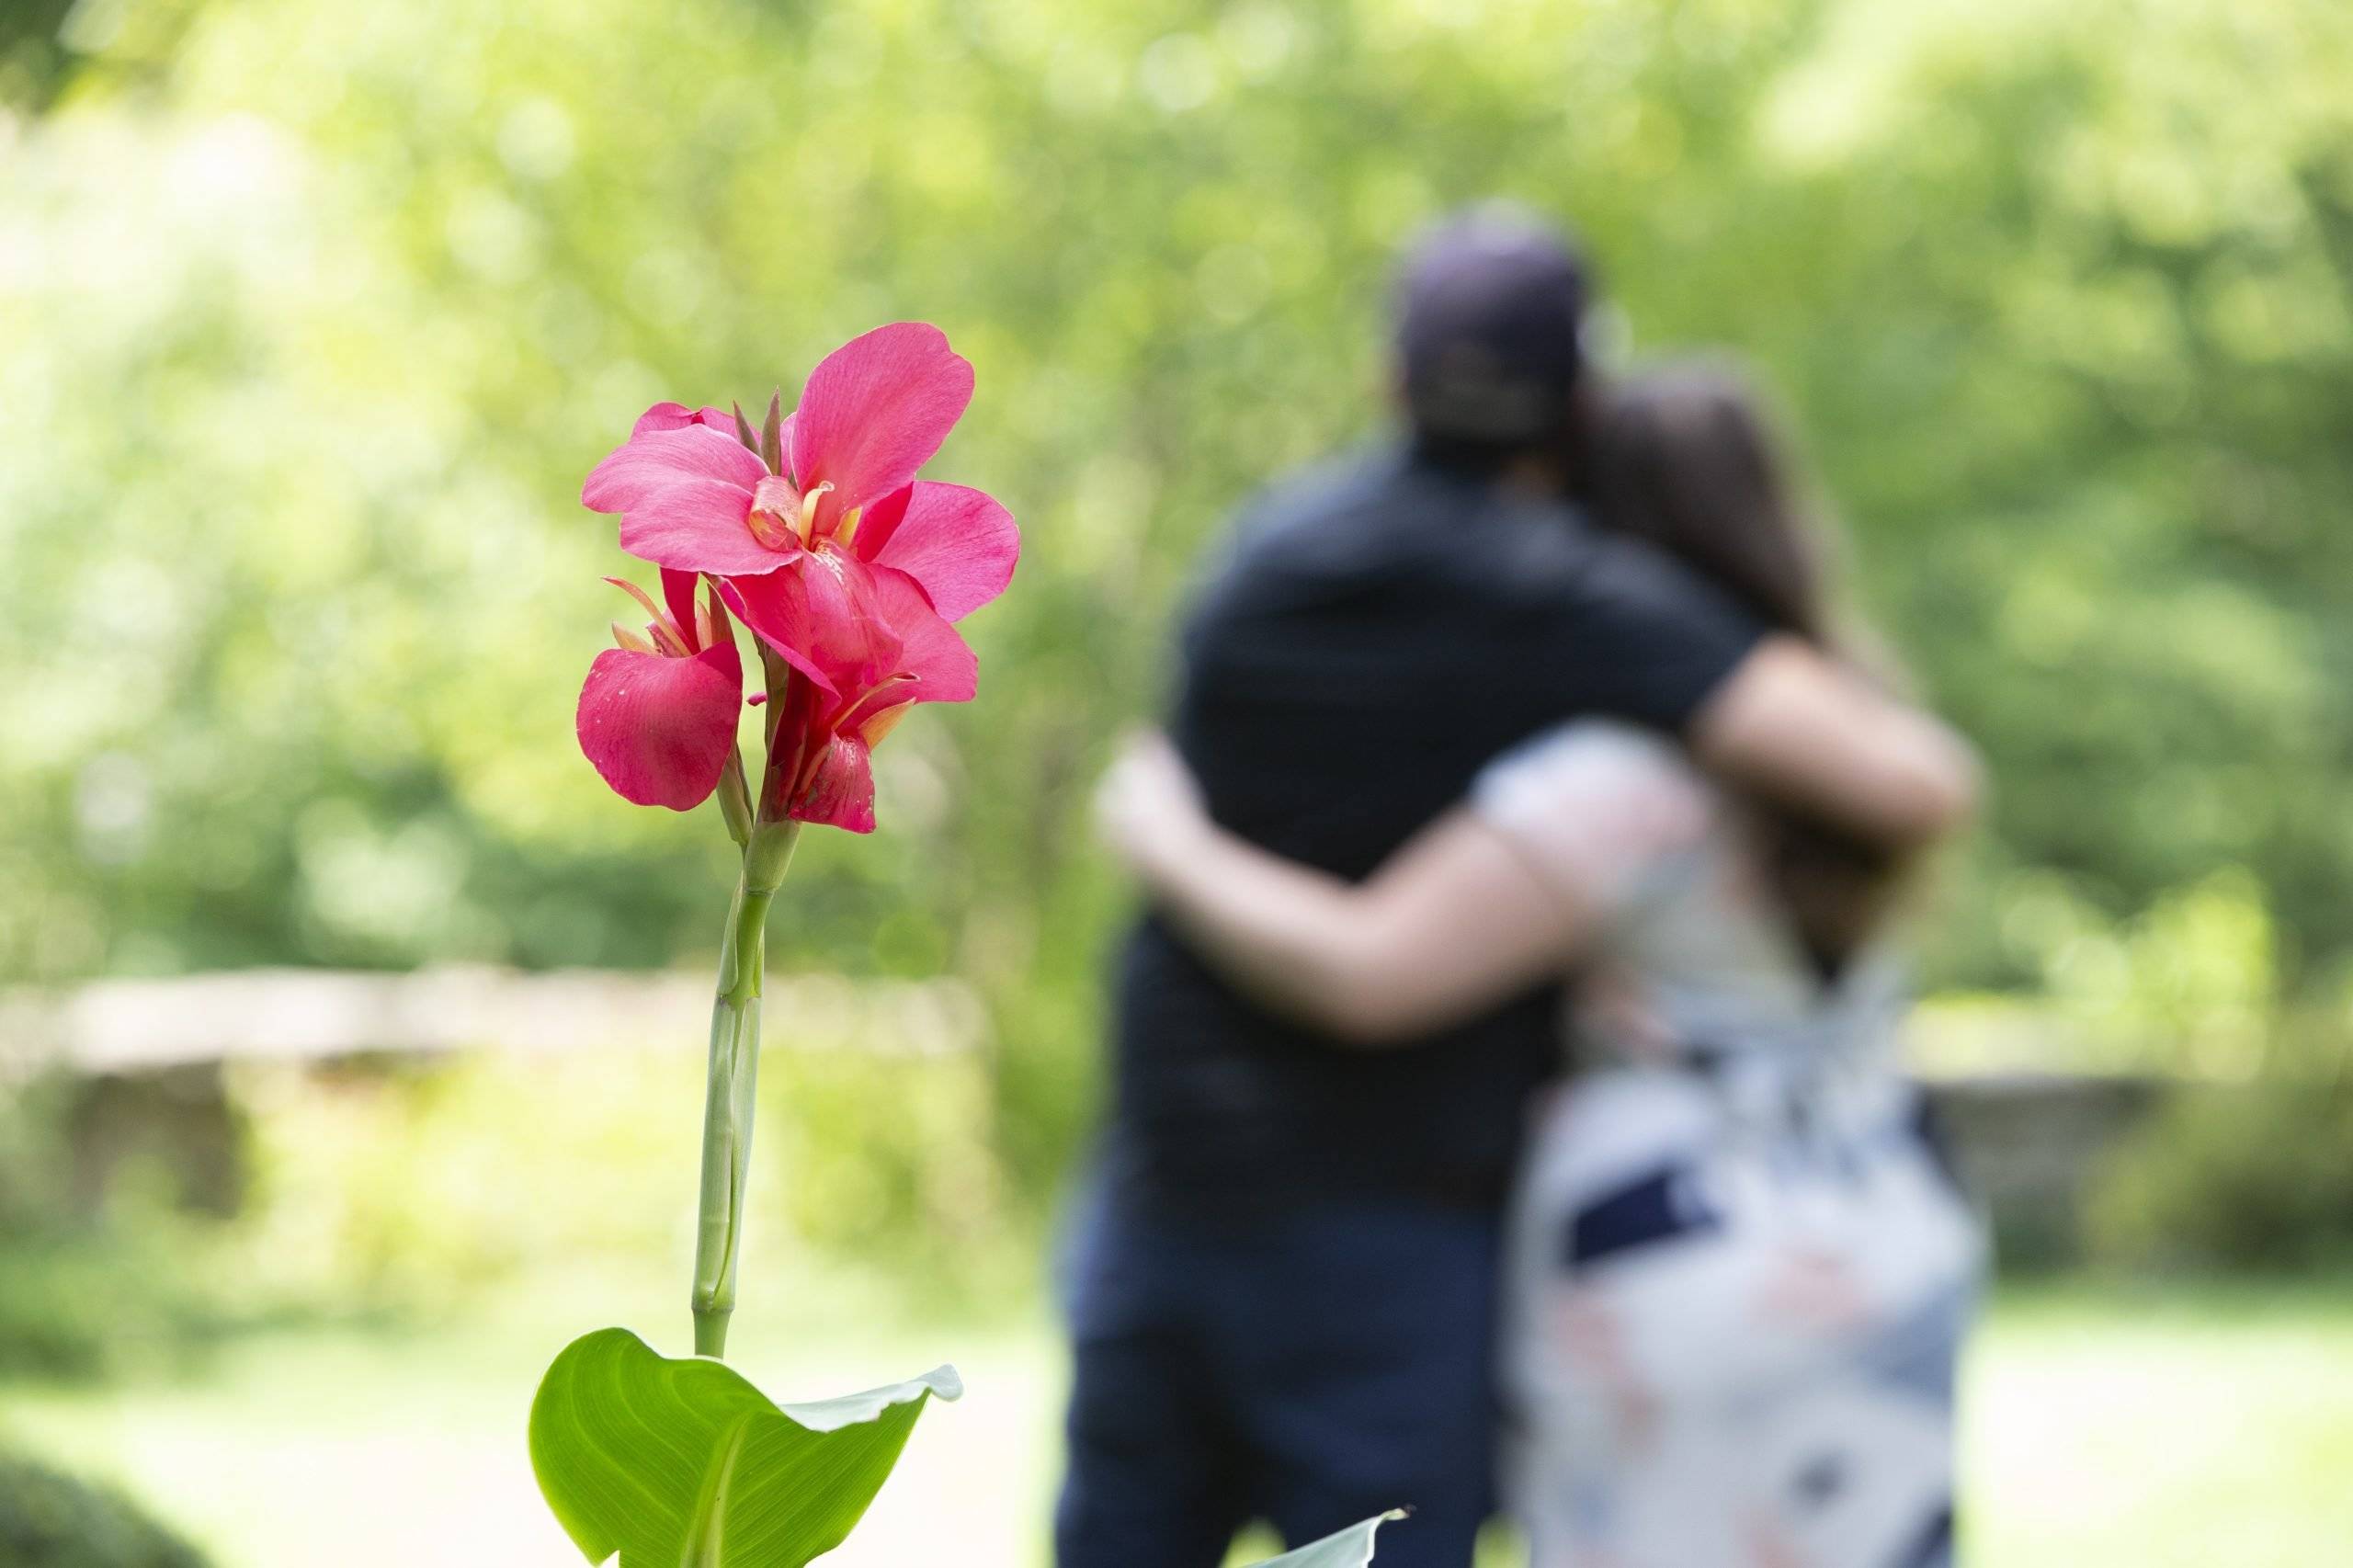 A man and woman hugging in front of a flower.